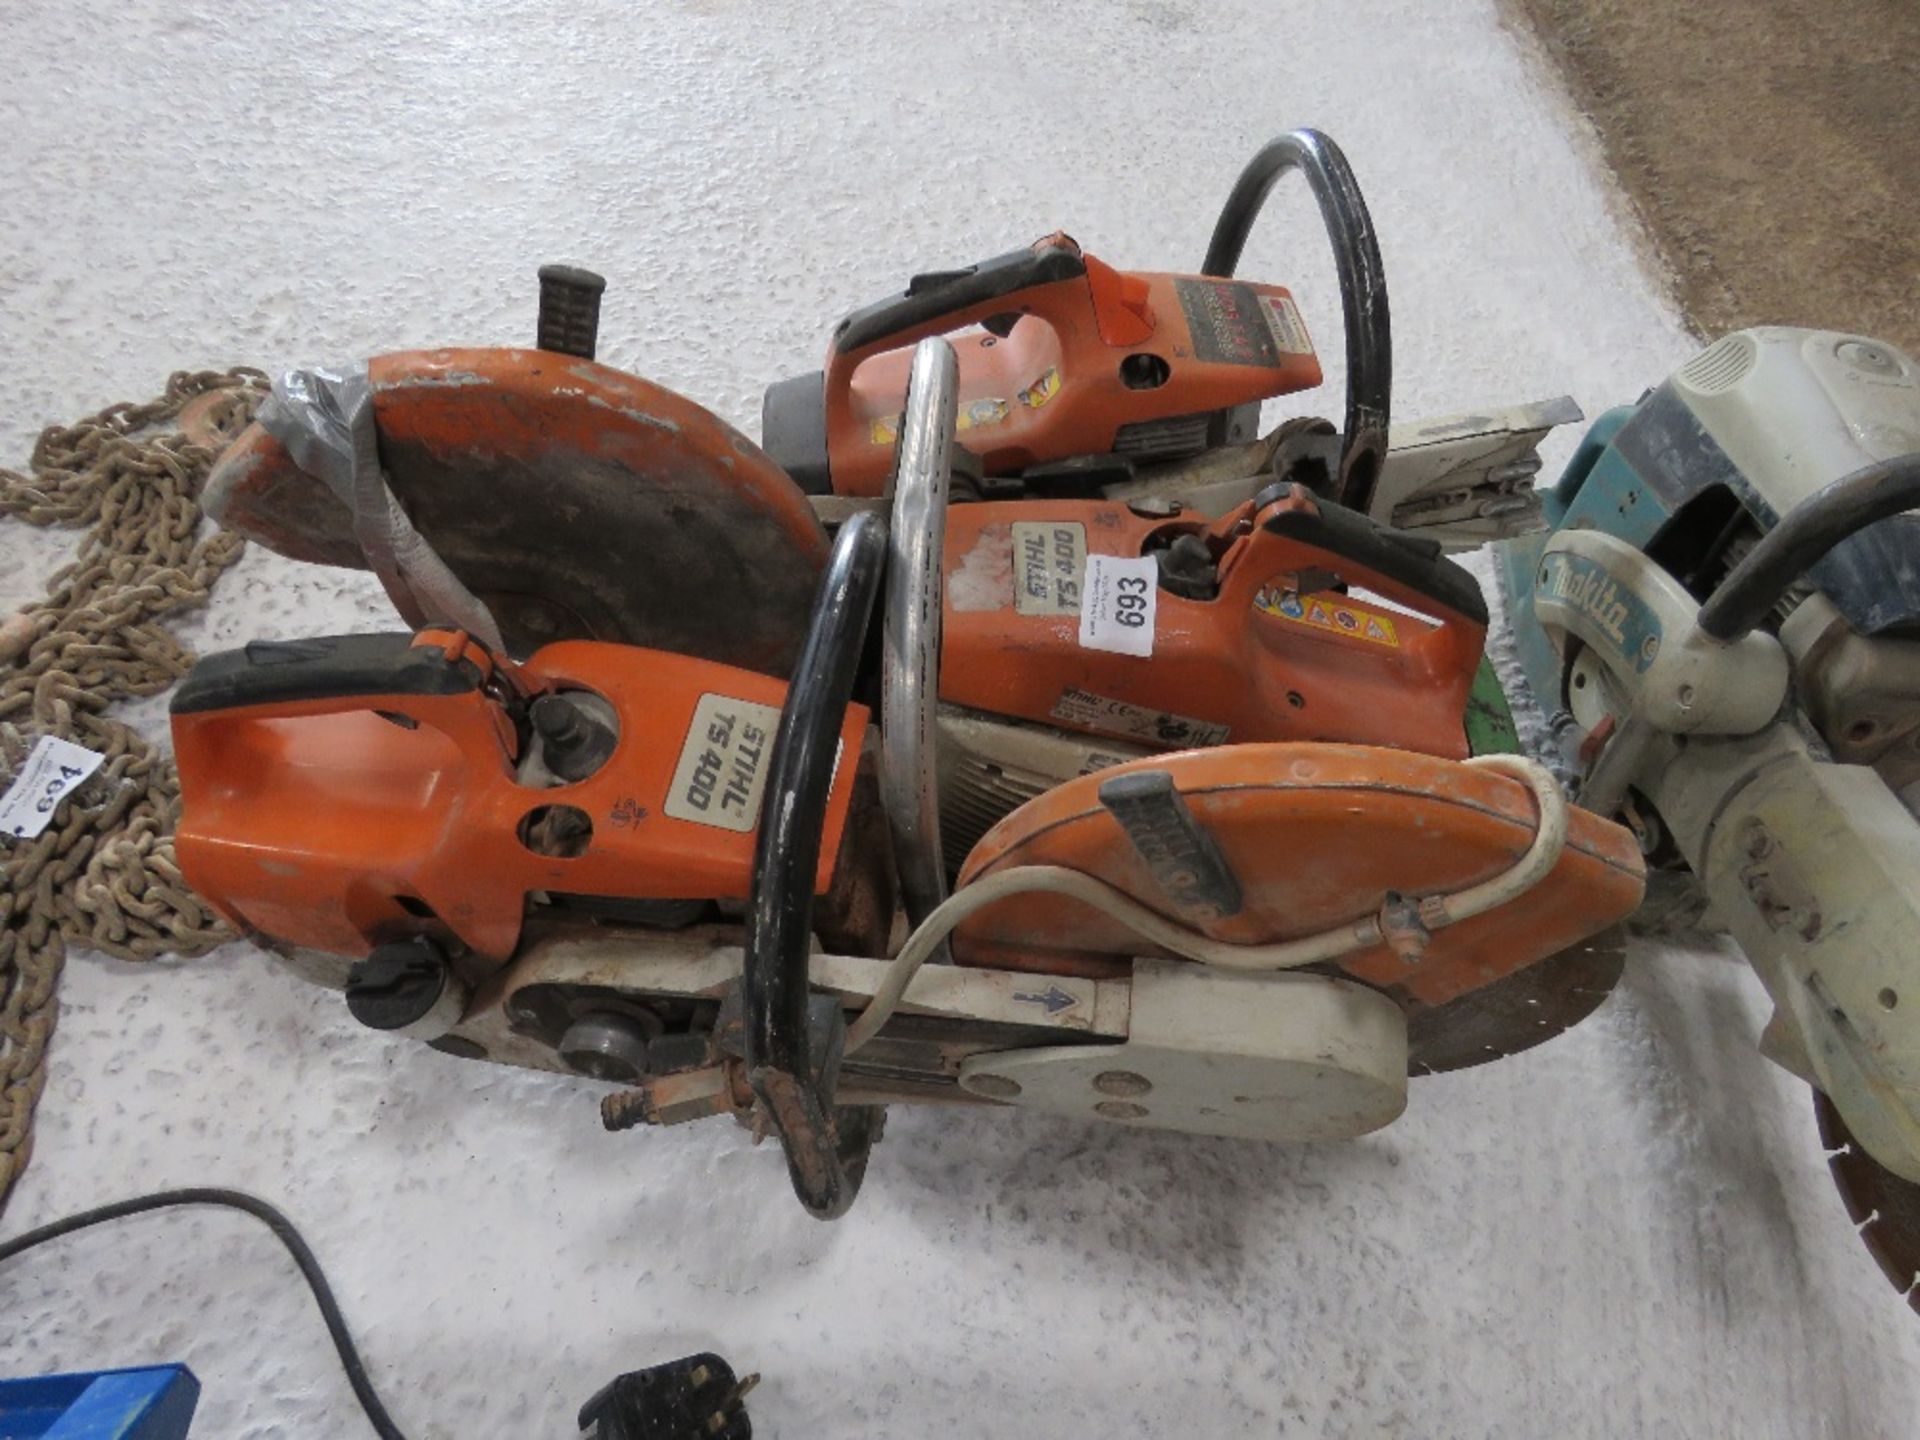 3 X STIHL TS400 PETROL SAWS FOR SPARES OR REPAIR.....THIS LOT IS SOLD UNDER THE AUCTIONEERS MARGIN S - Image 4 of 6